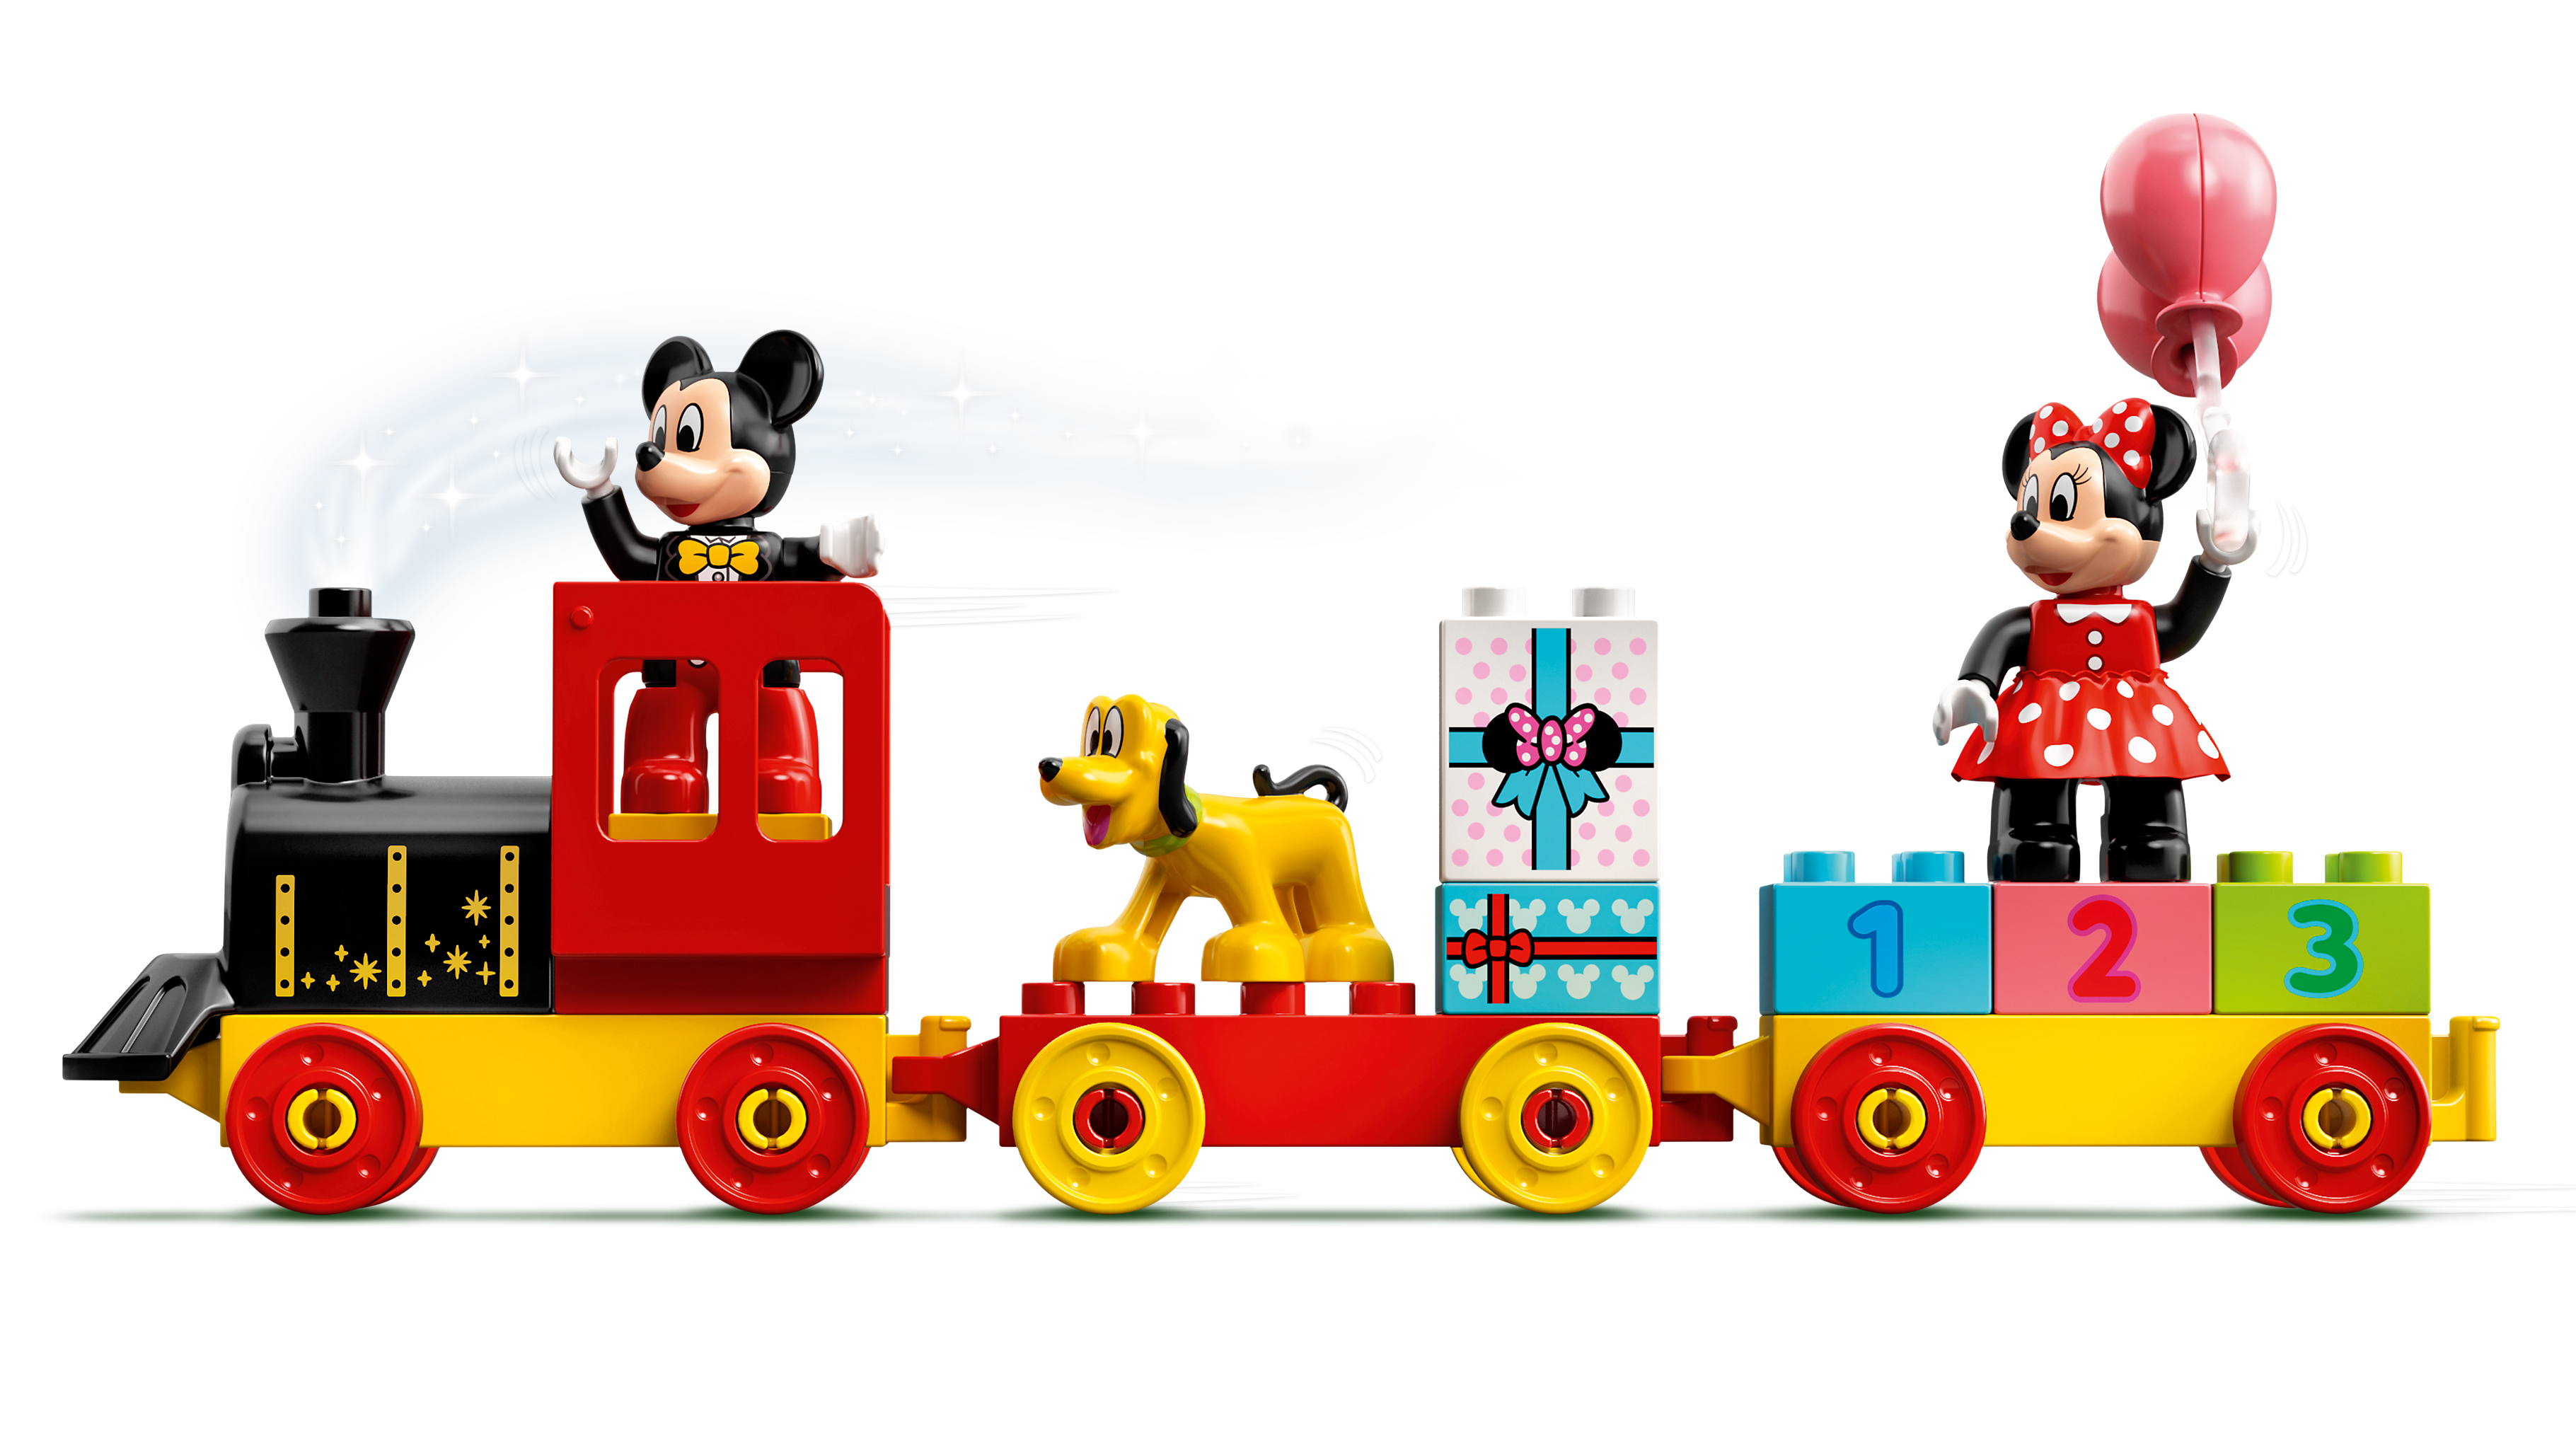 Mickey & Minnie Birthday Train 10941 | Disney™ | Buy online at the Official  LEGO® Shop US